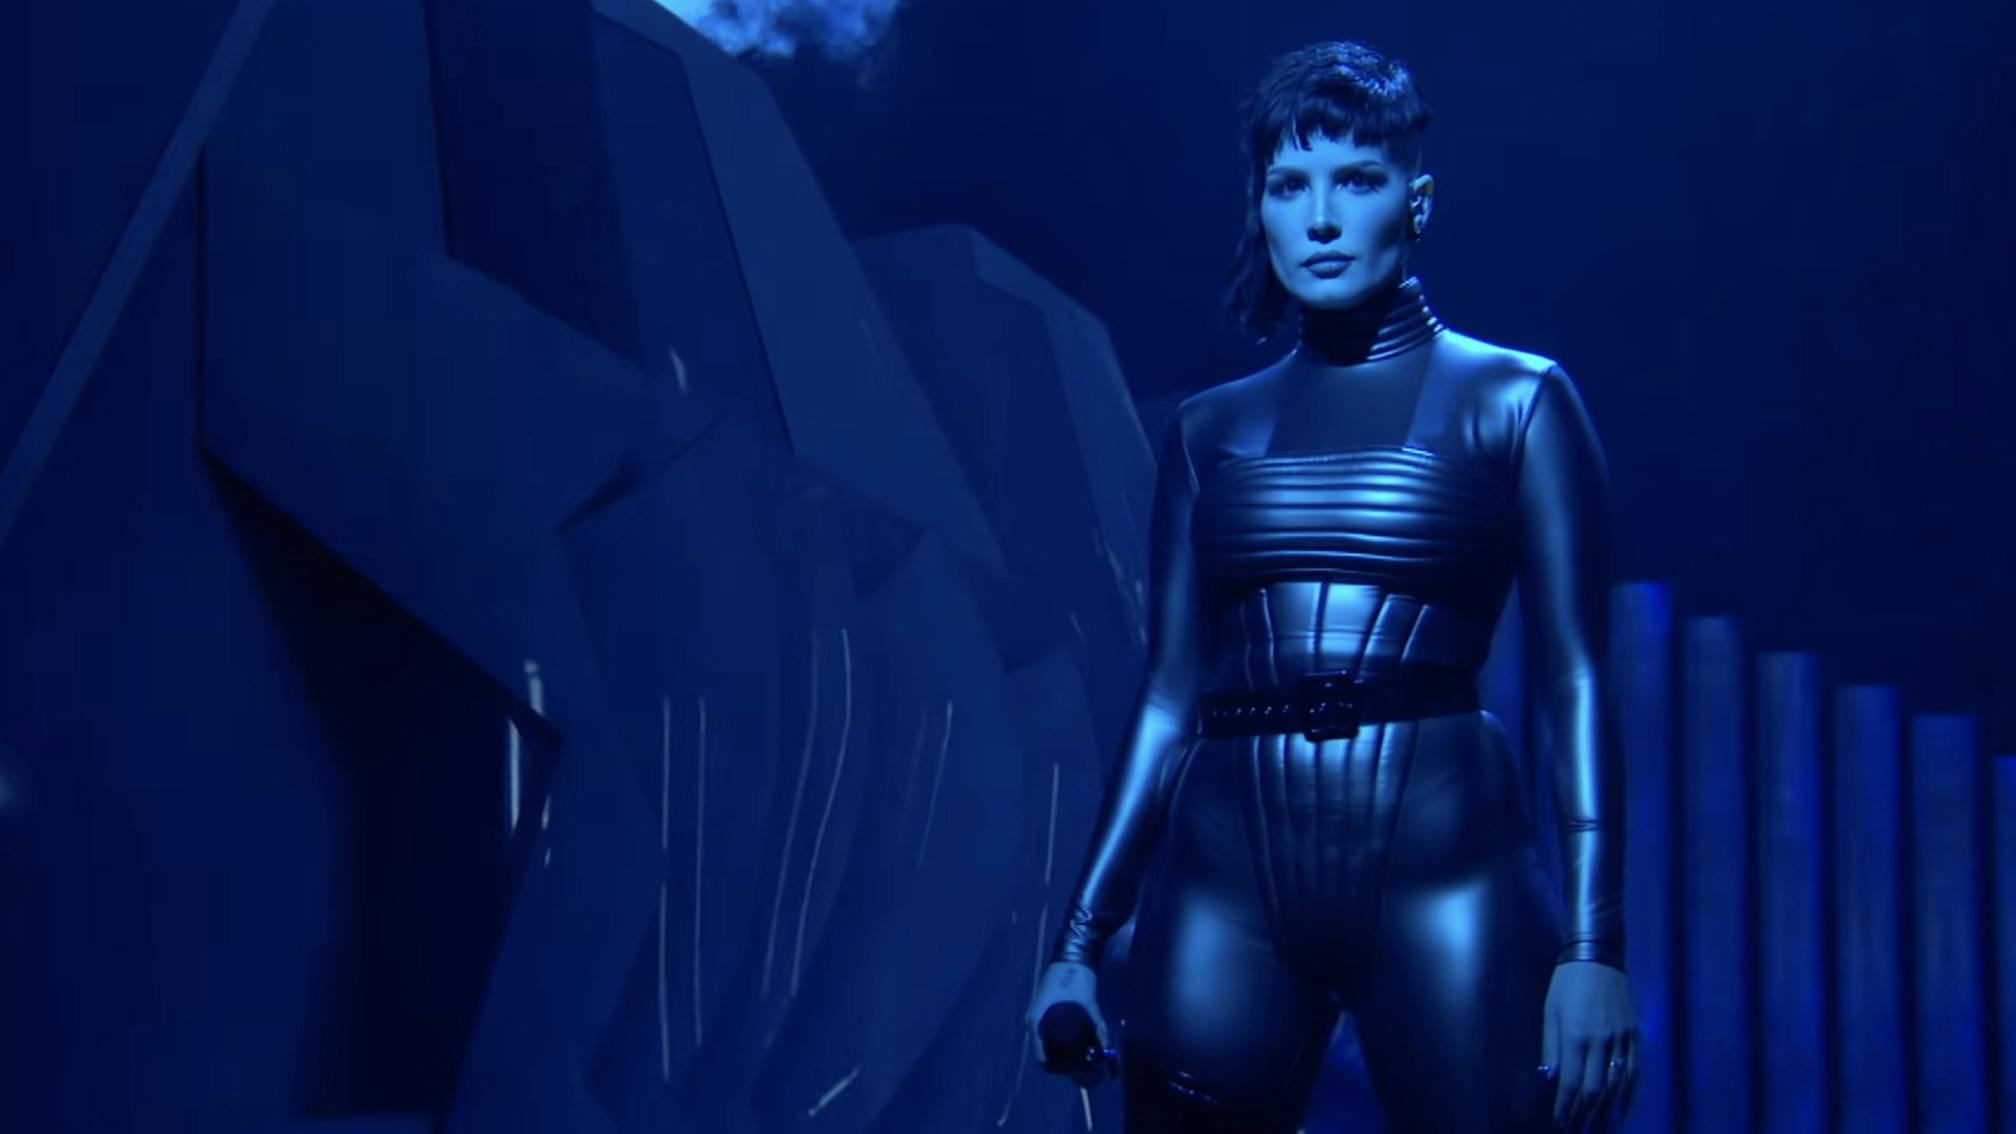 Watch: Halsey performs I am not a woman, I'm a god and Darling on Saturday Night Live